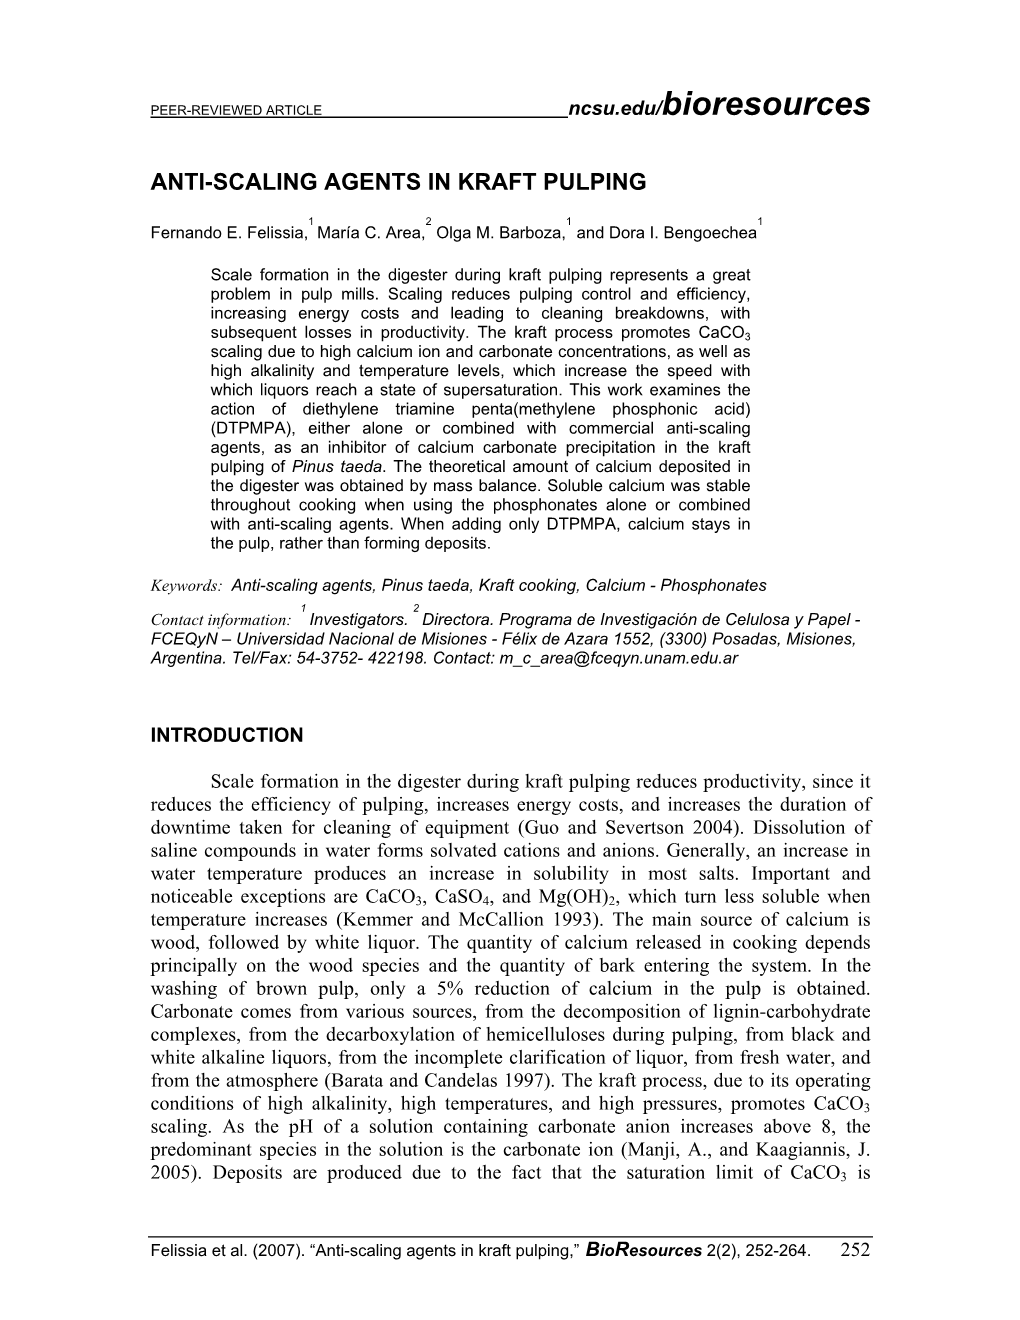 Anti-Scaling Agents in Kraft Pulping